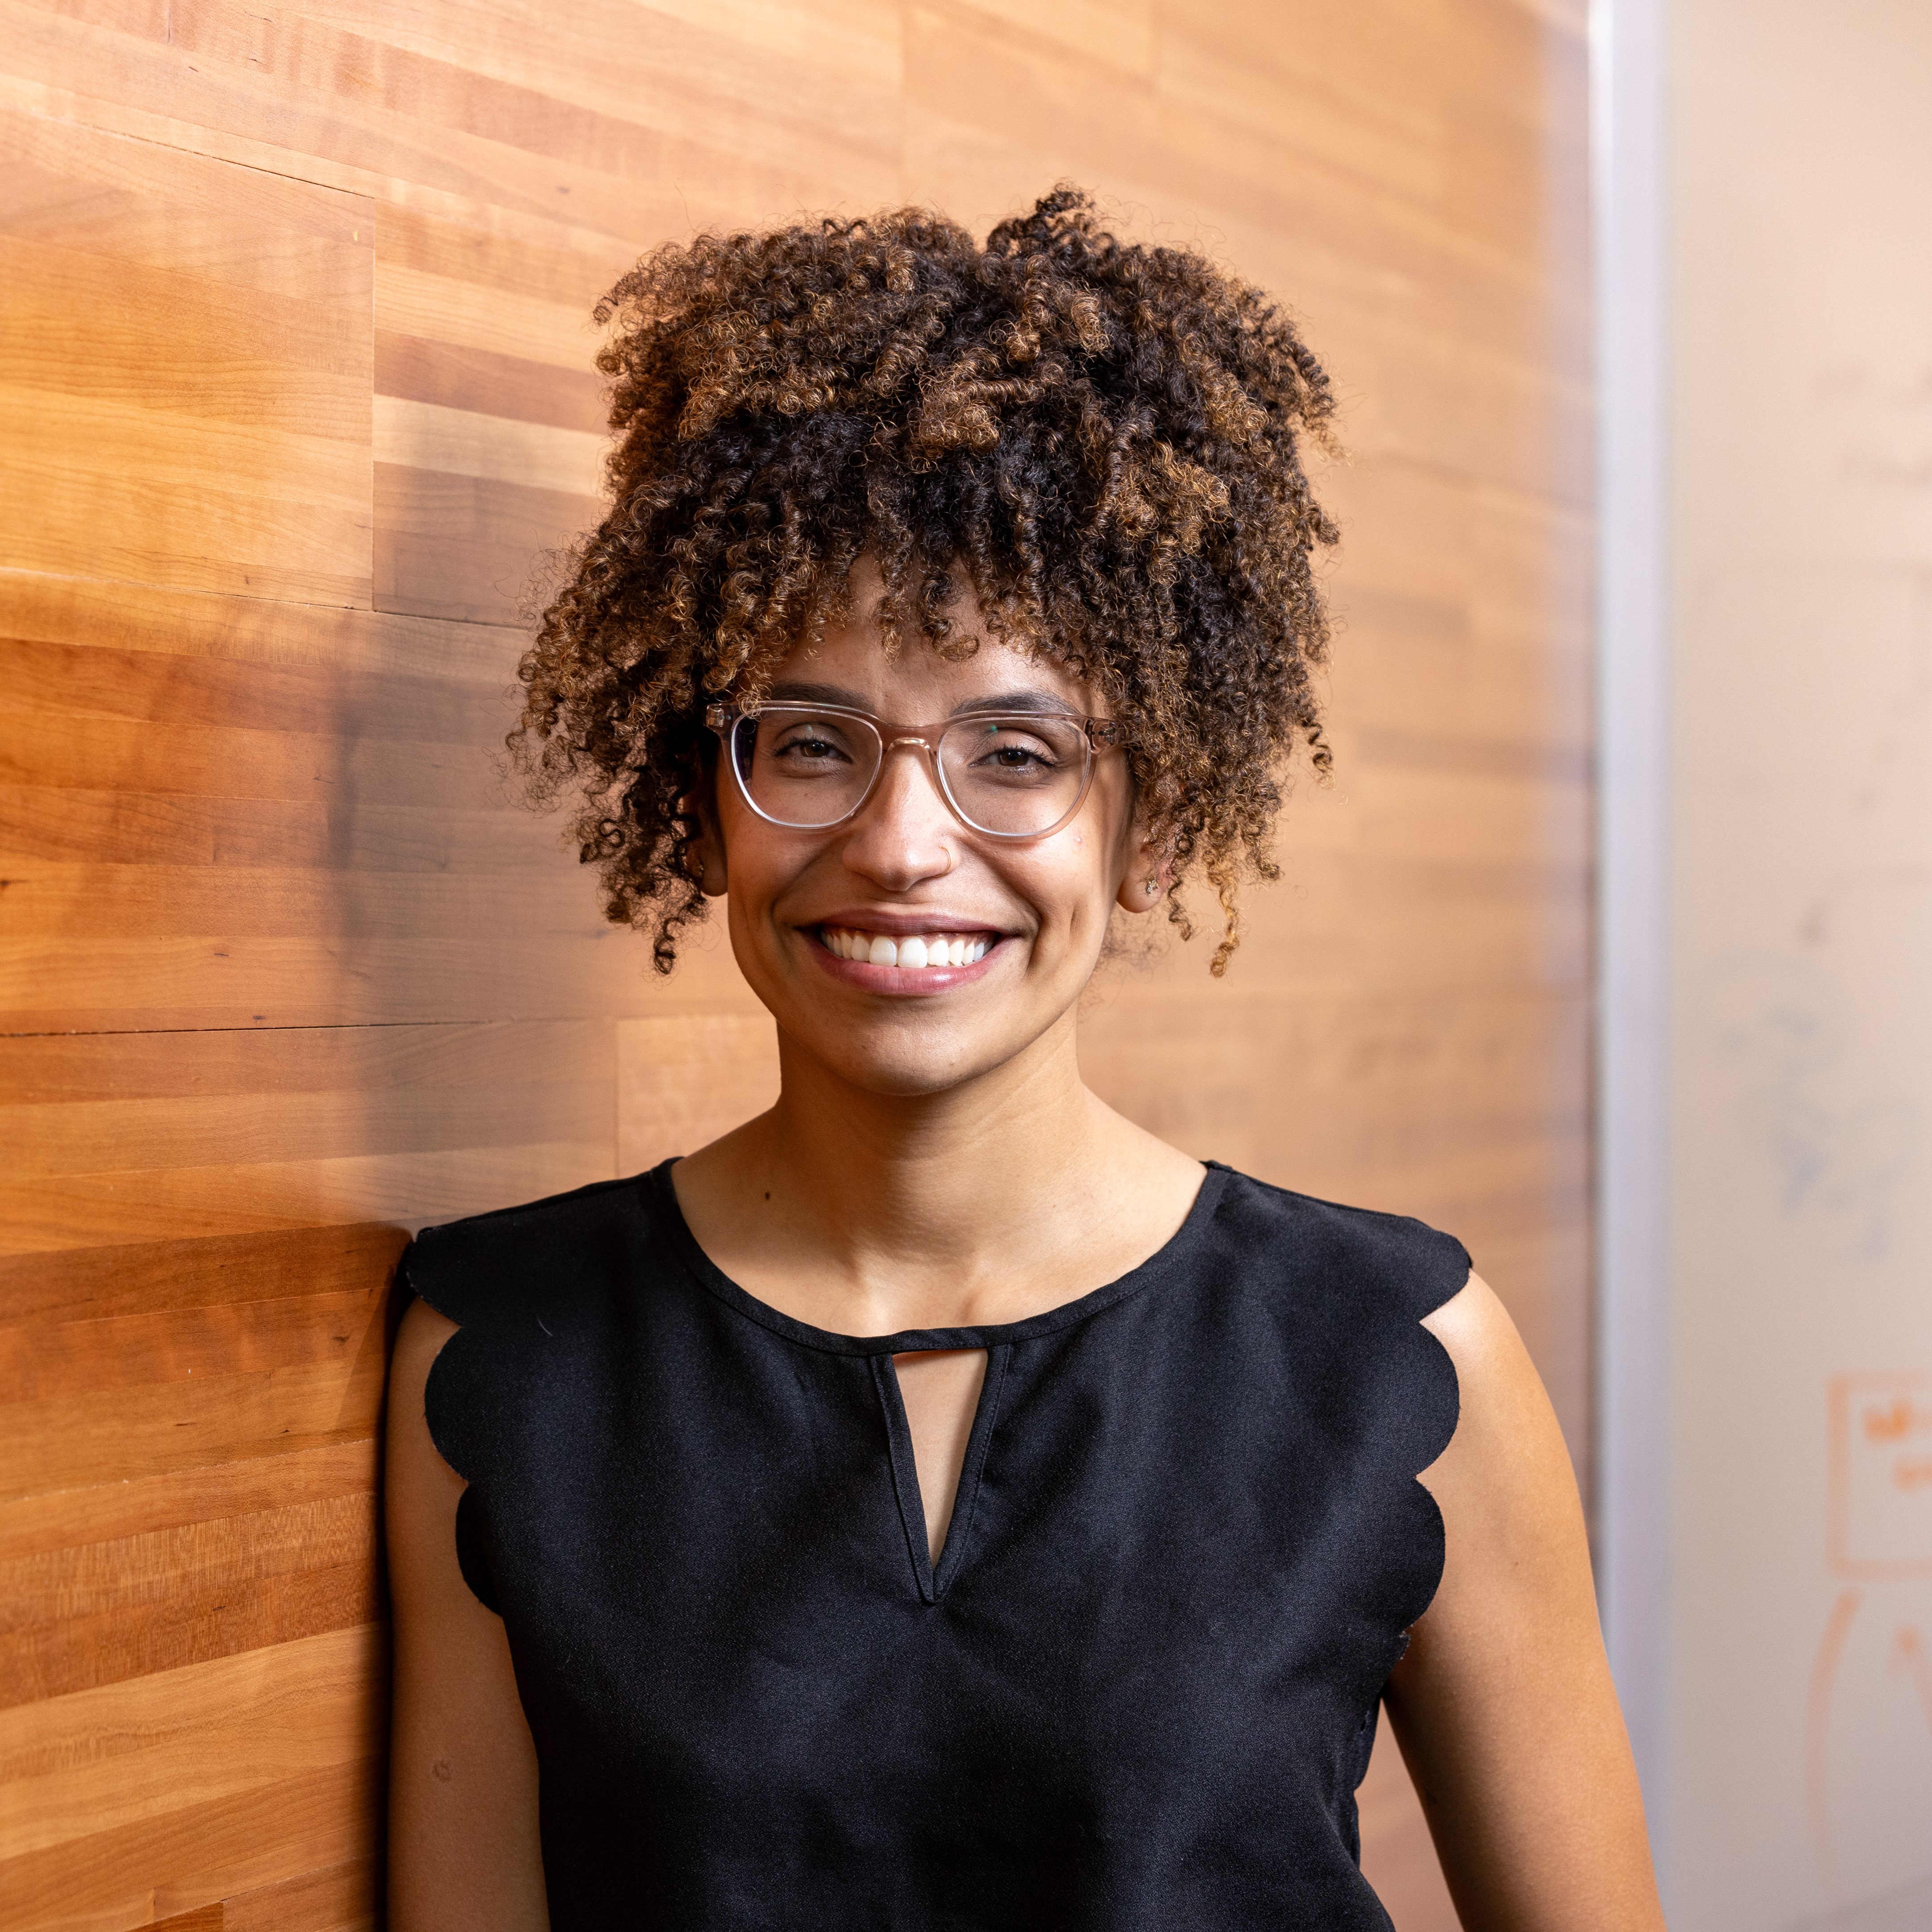 Fernanda is a light-skinned Black Latina woman, looking at the camera and smiling. She wears glasses and has big curly hair. She is wearing a shitless black top and is leaning on a wooden wall.